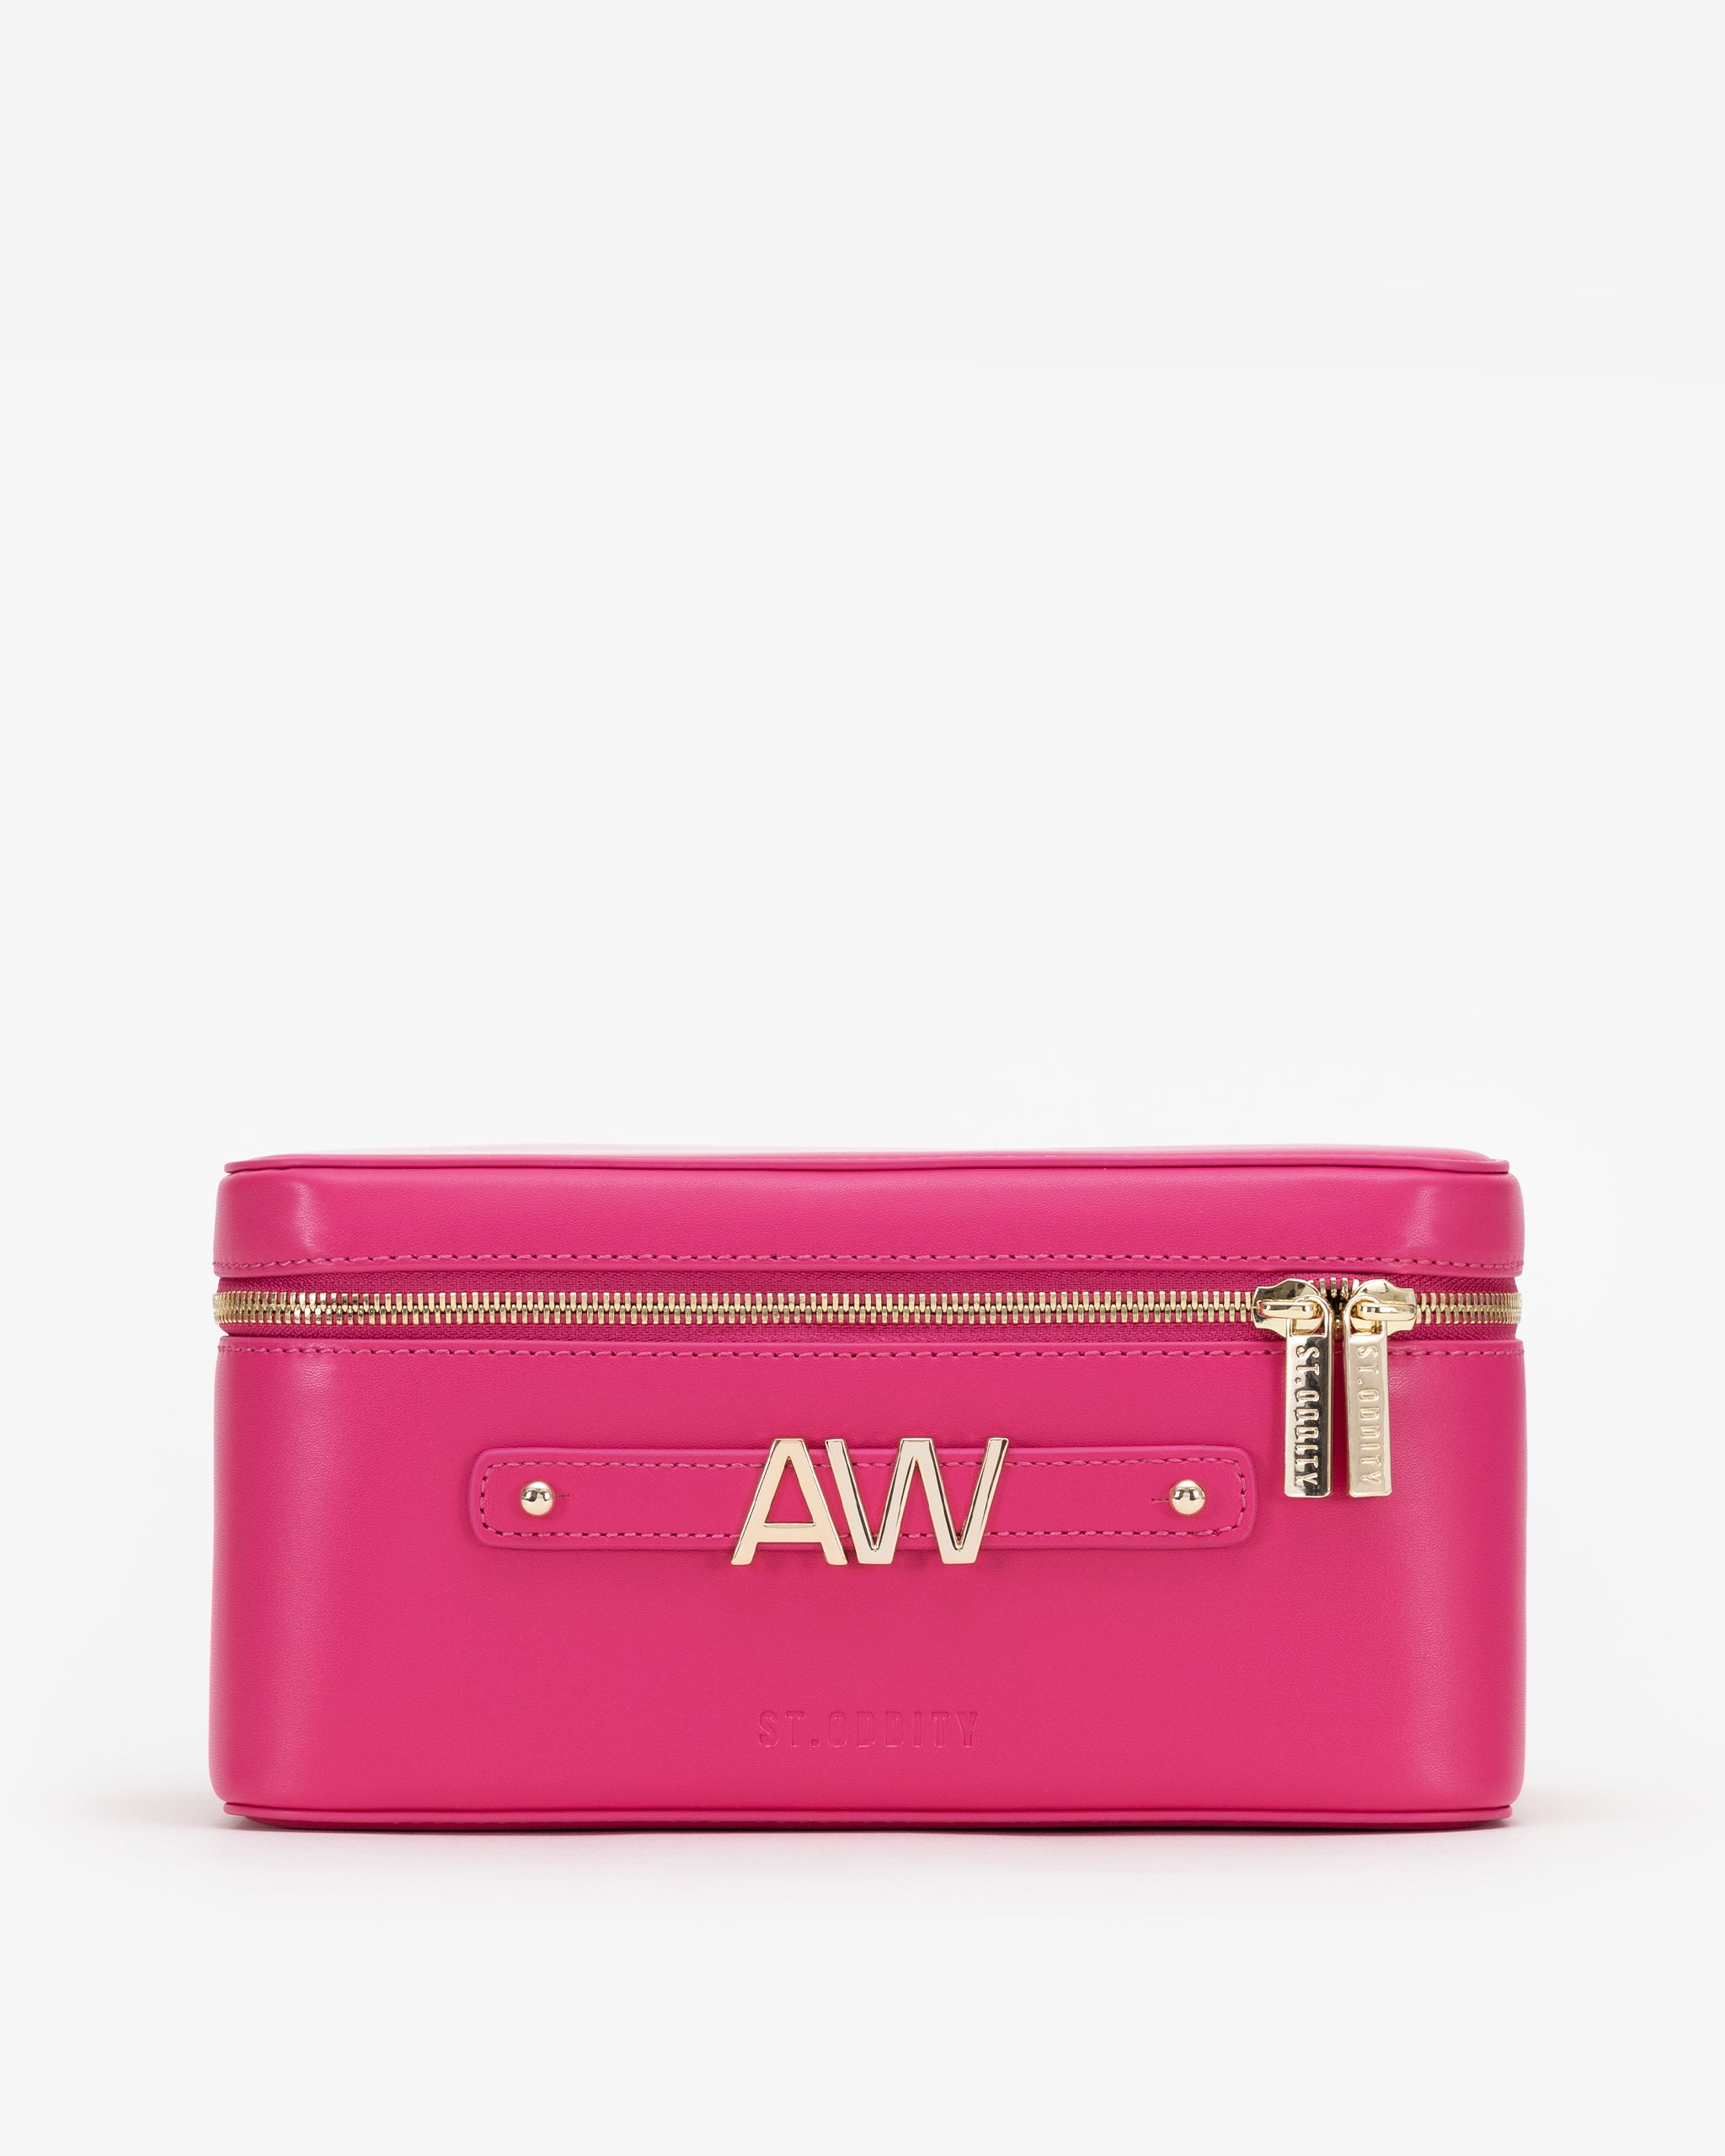 Vanity Case in Hot Pink with Personalised Hardware